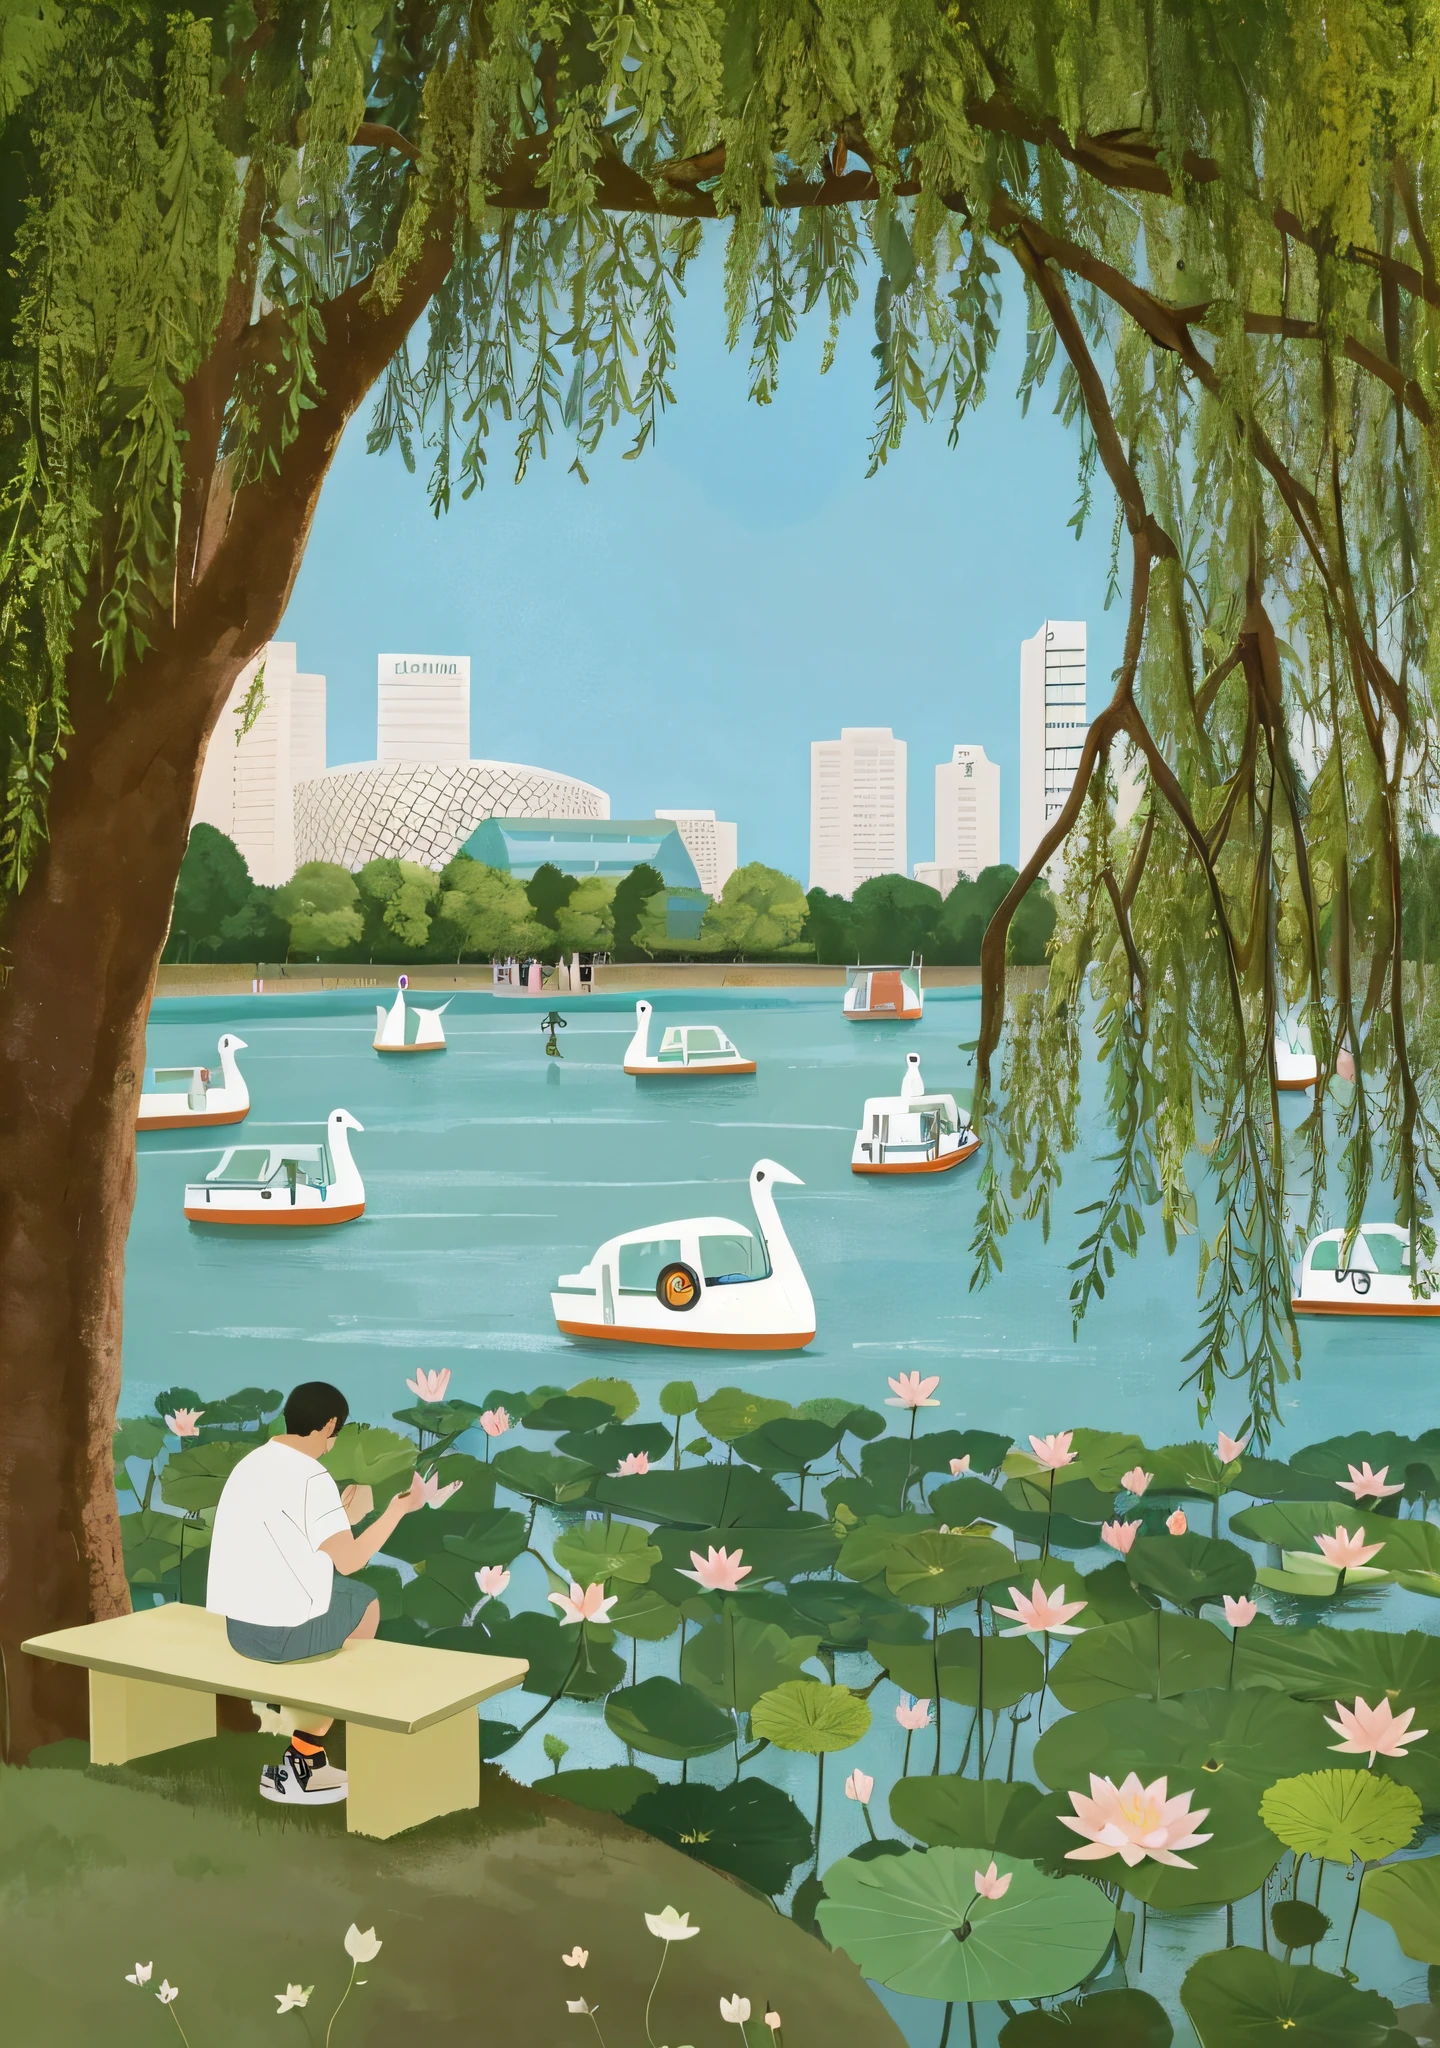 The painting shows a man sitting on a bench by the water, parks and lakes, a beautiful artwork illustration, Suzhou, in a park，lakeside, in an eco city, Lotus pond, Inspired by Wu Guanzhong, Official illustration, nature returning to the city